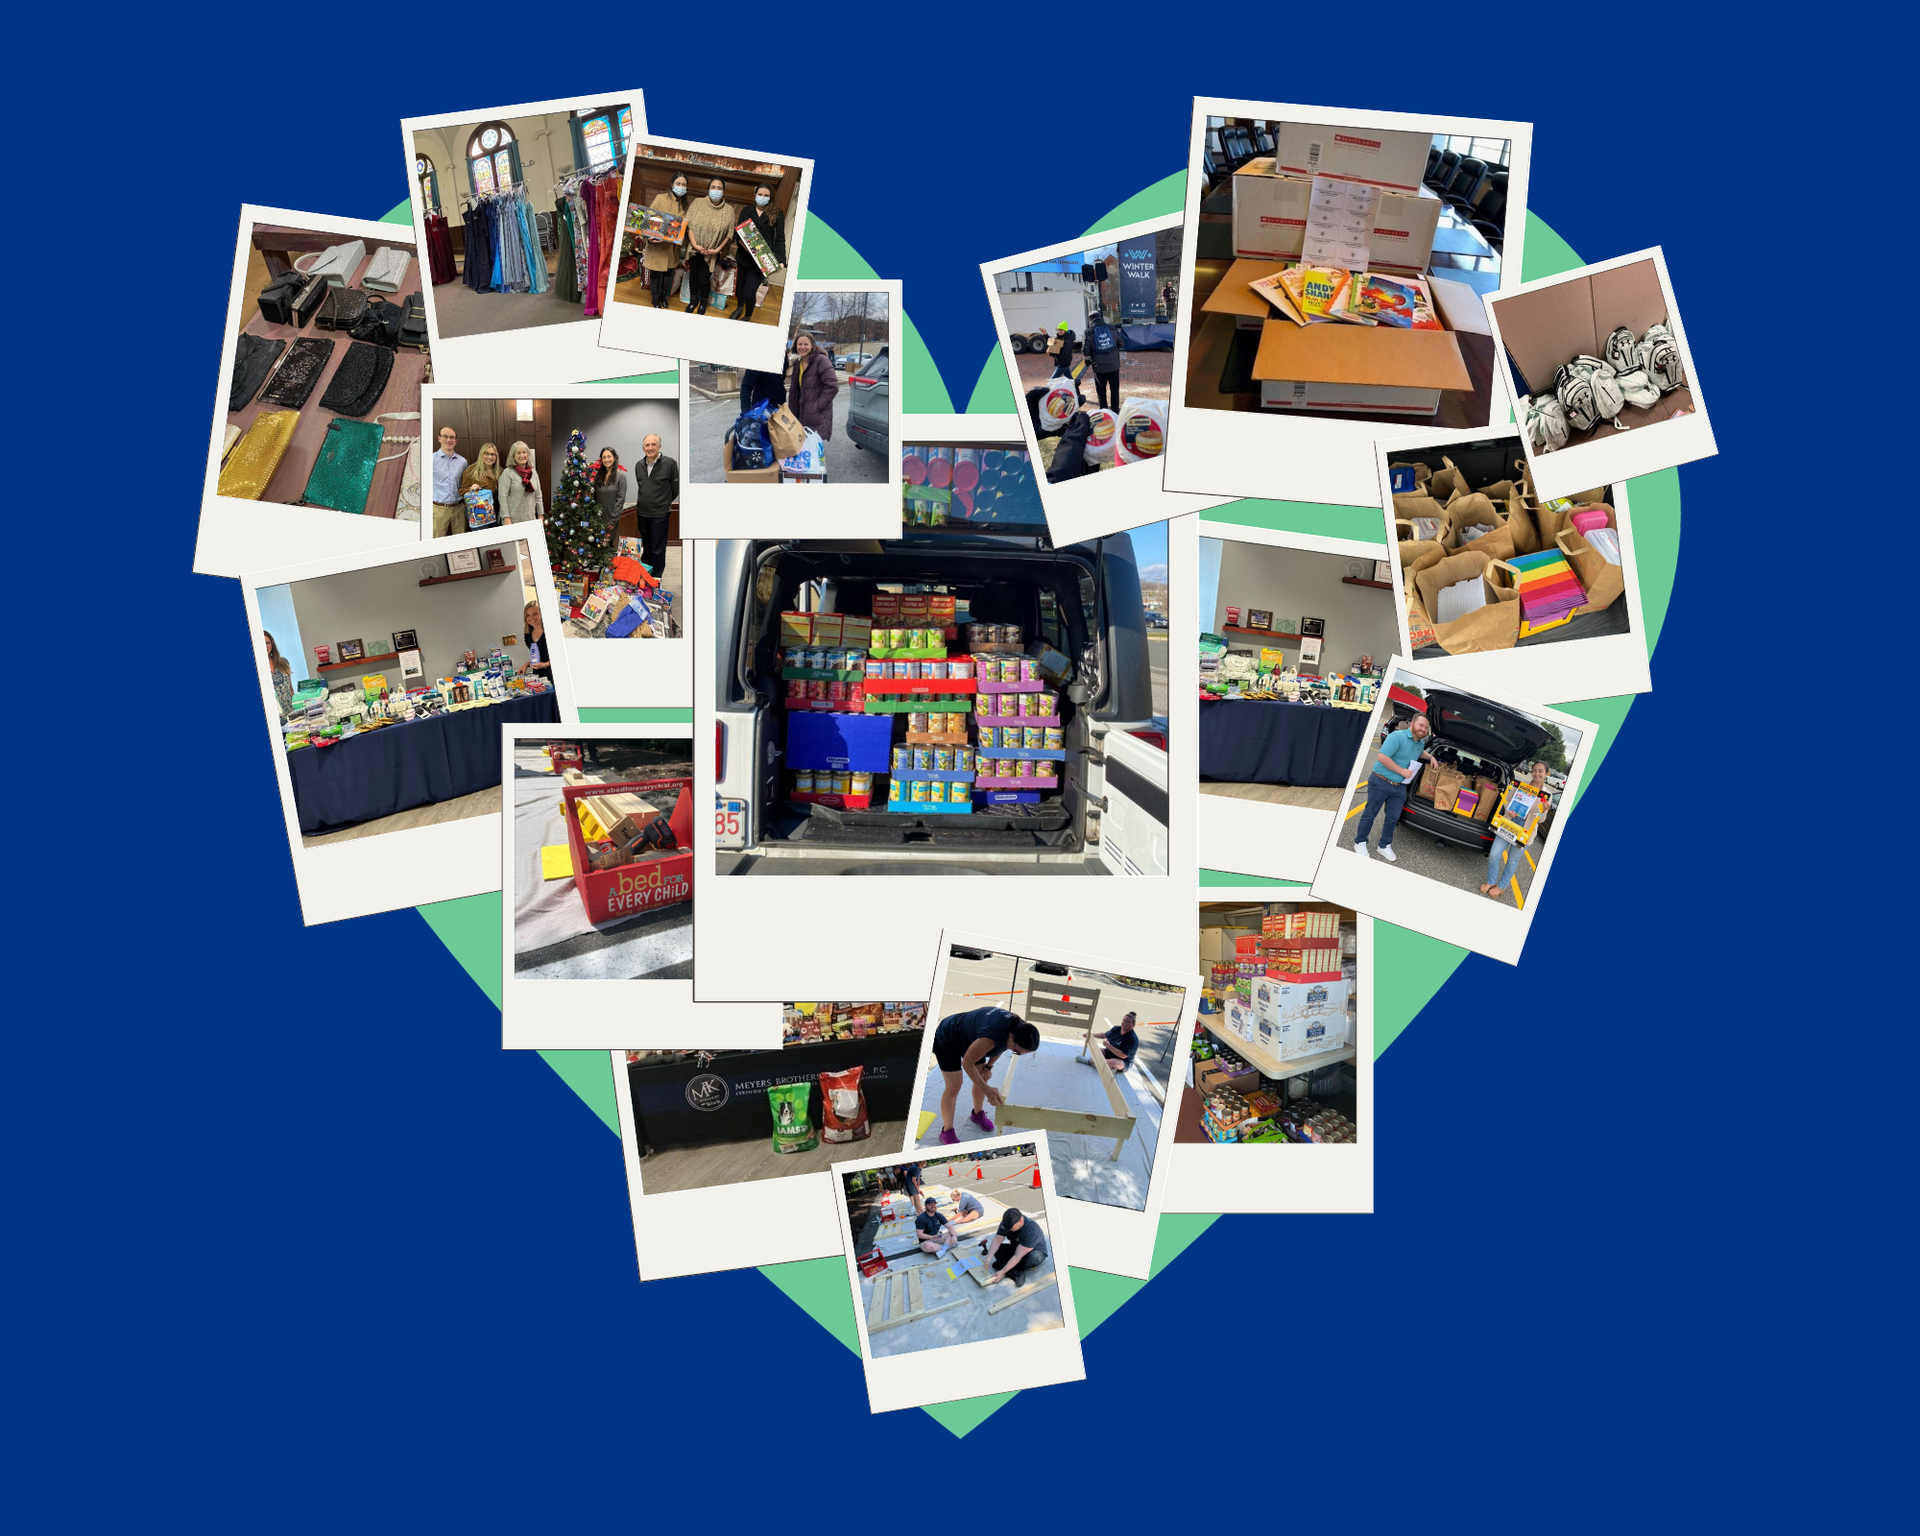 A collage of photos from MBKs monthly initiative assembled in the shape of a heart